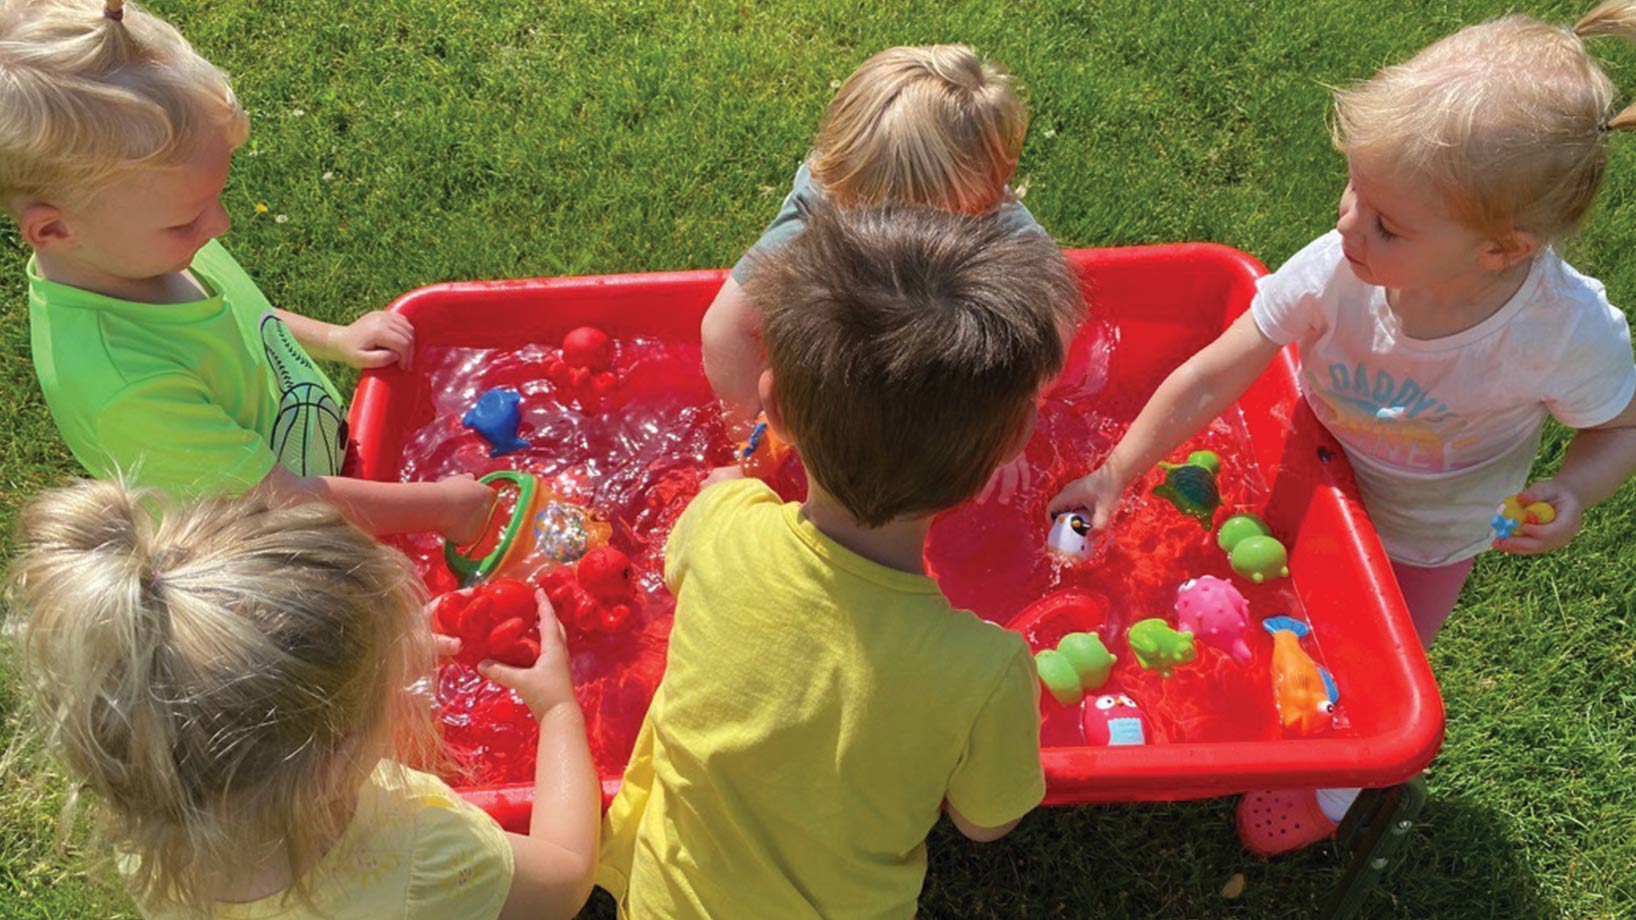 Group of kids playing in water sensory tub on grass